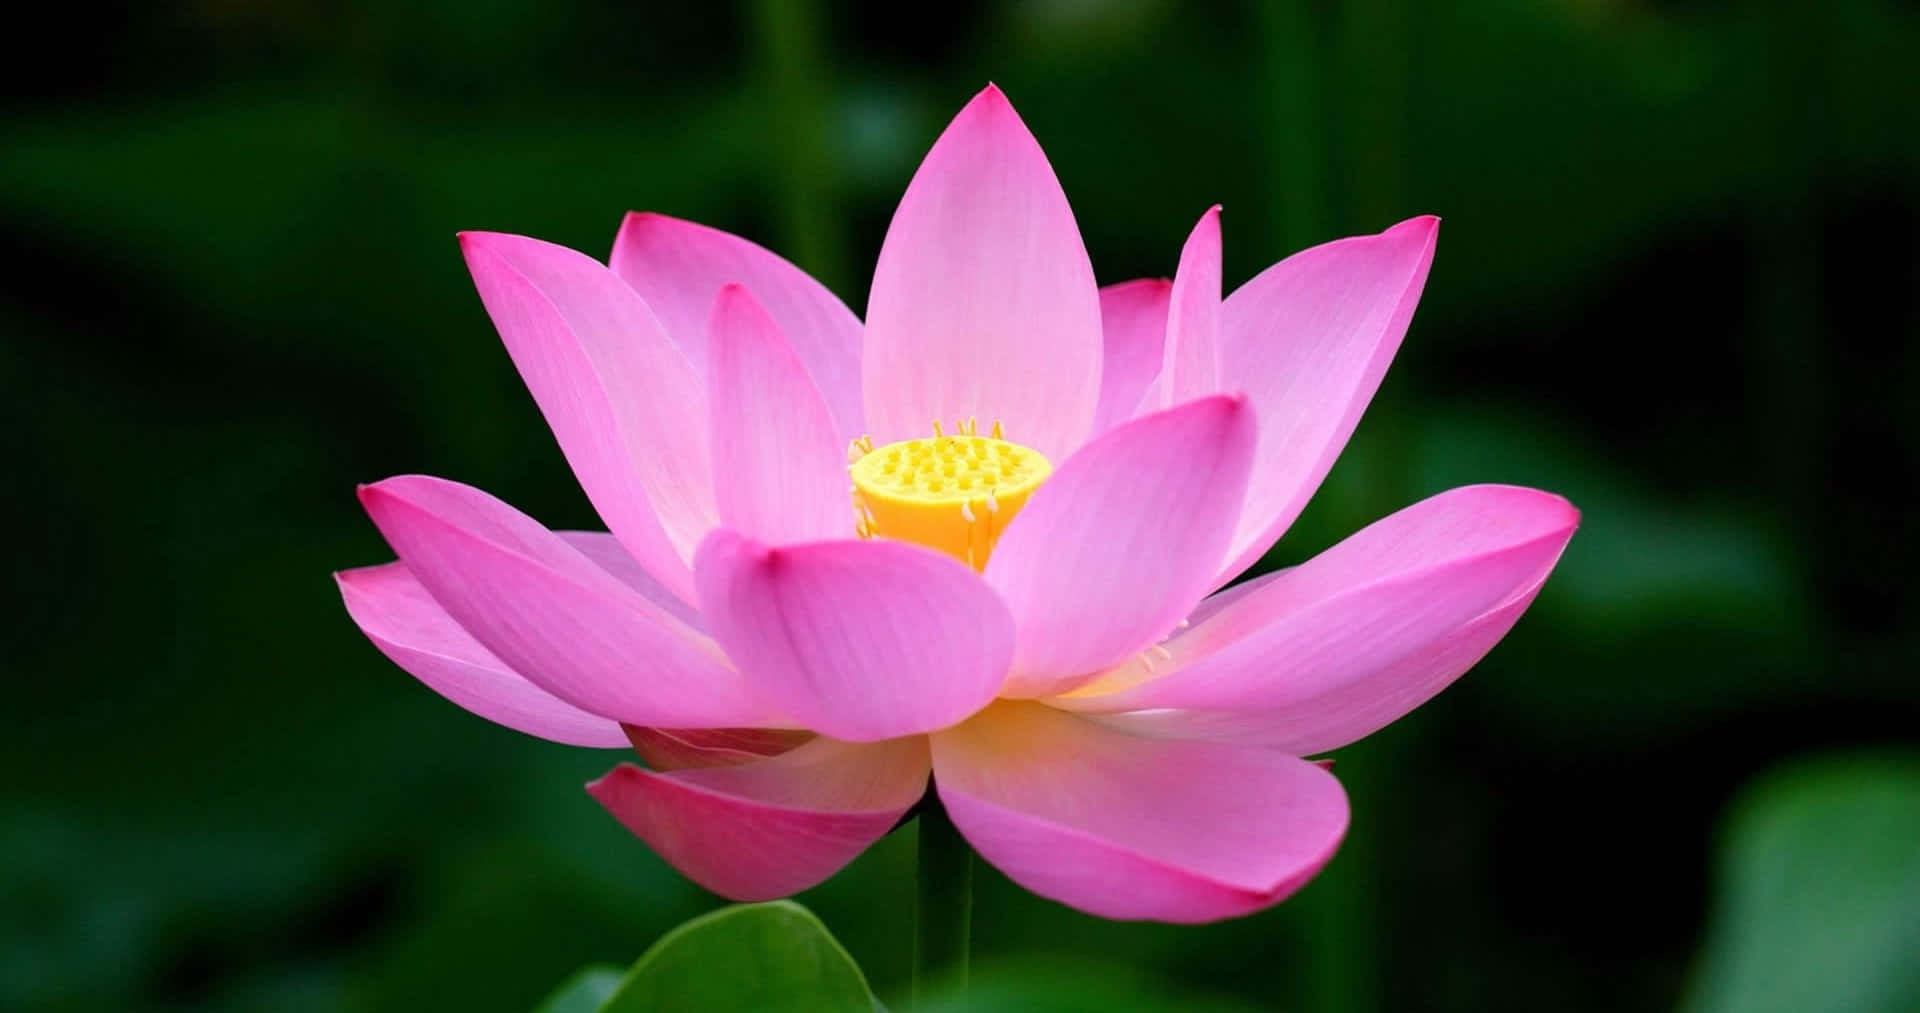 A beautiful pink lotus flower blossoming in a peaceful garden